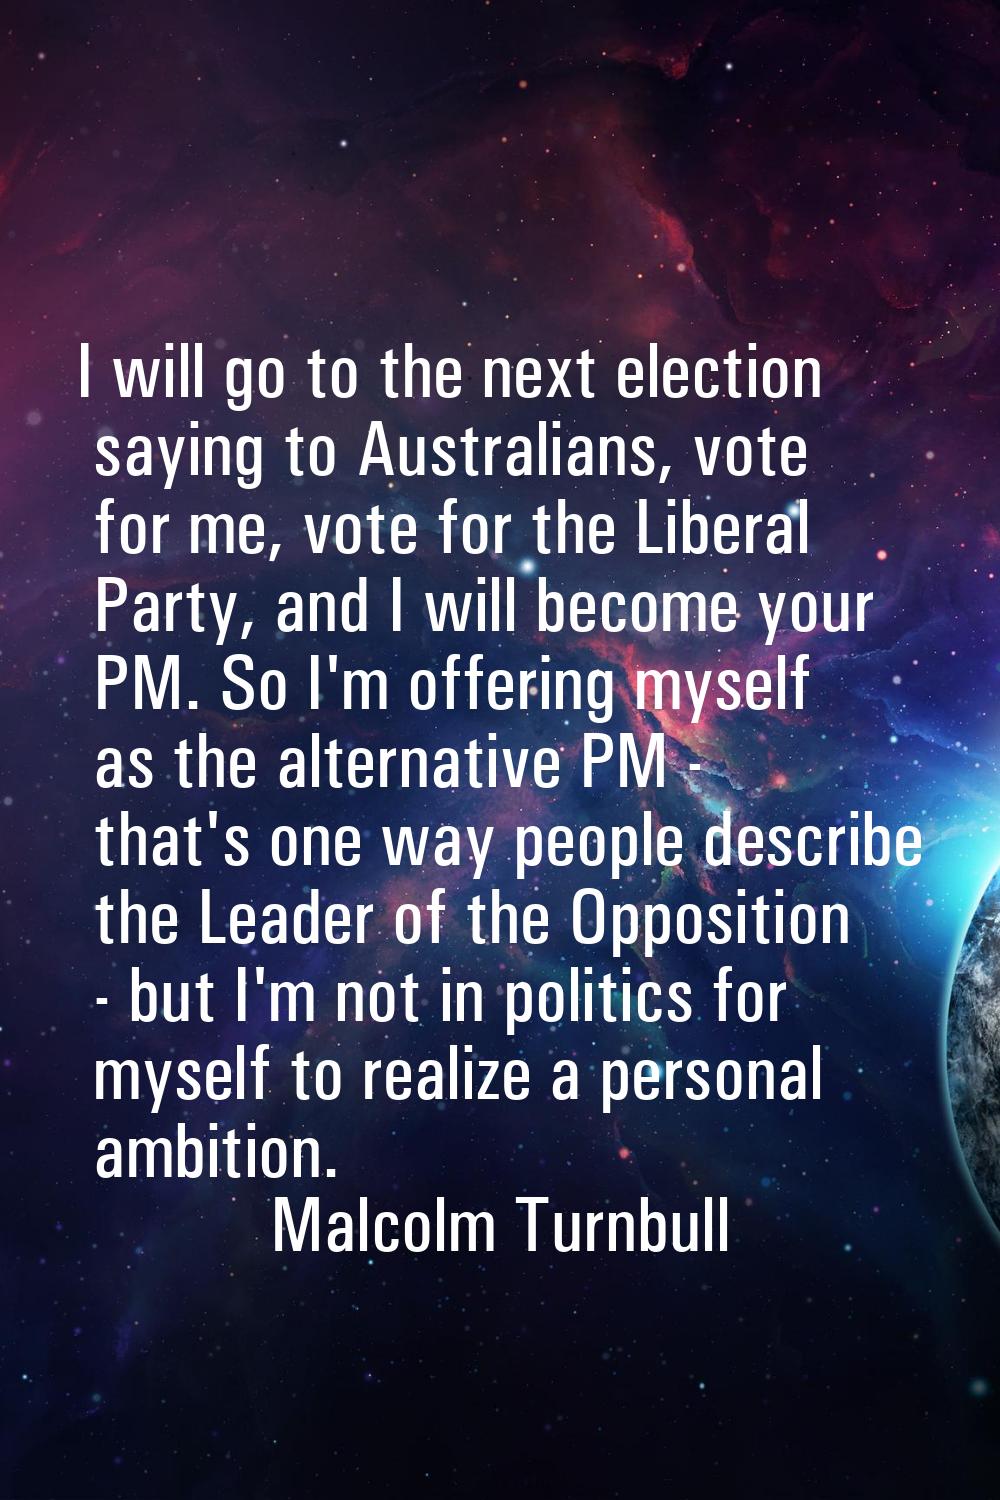 I will go to the next election saying to Australians, vote for me, vote for the Liberal Party, and 